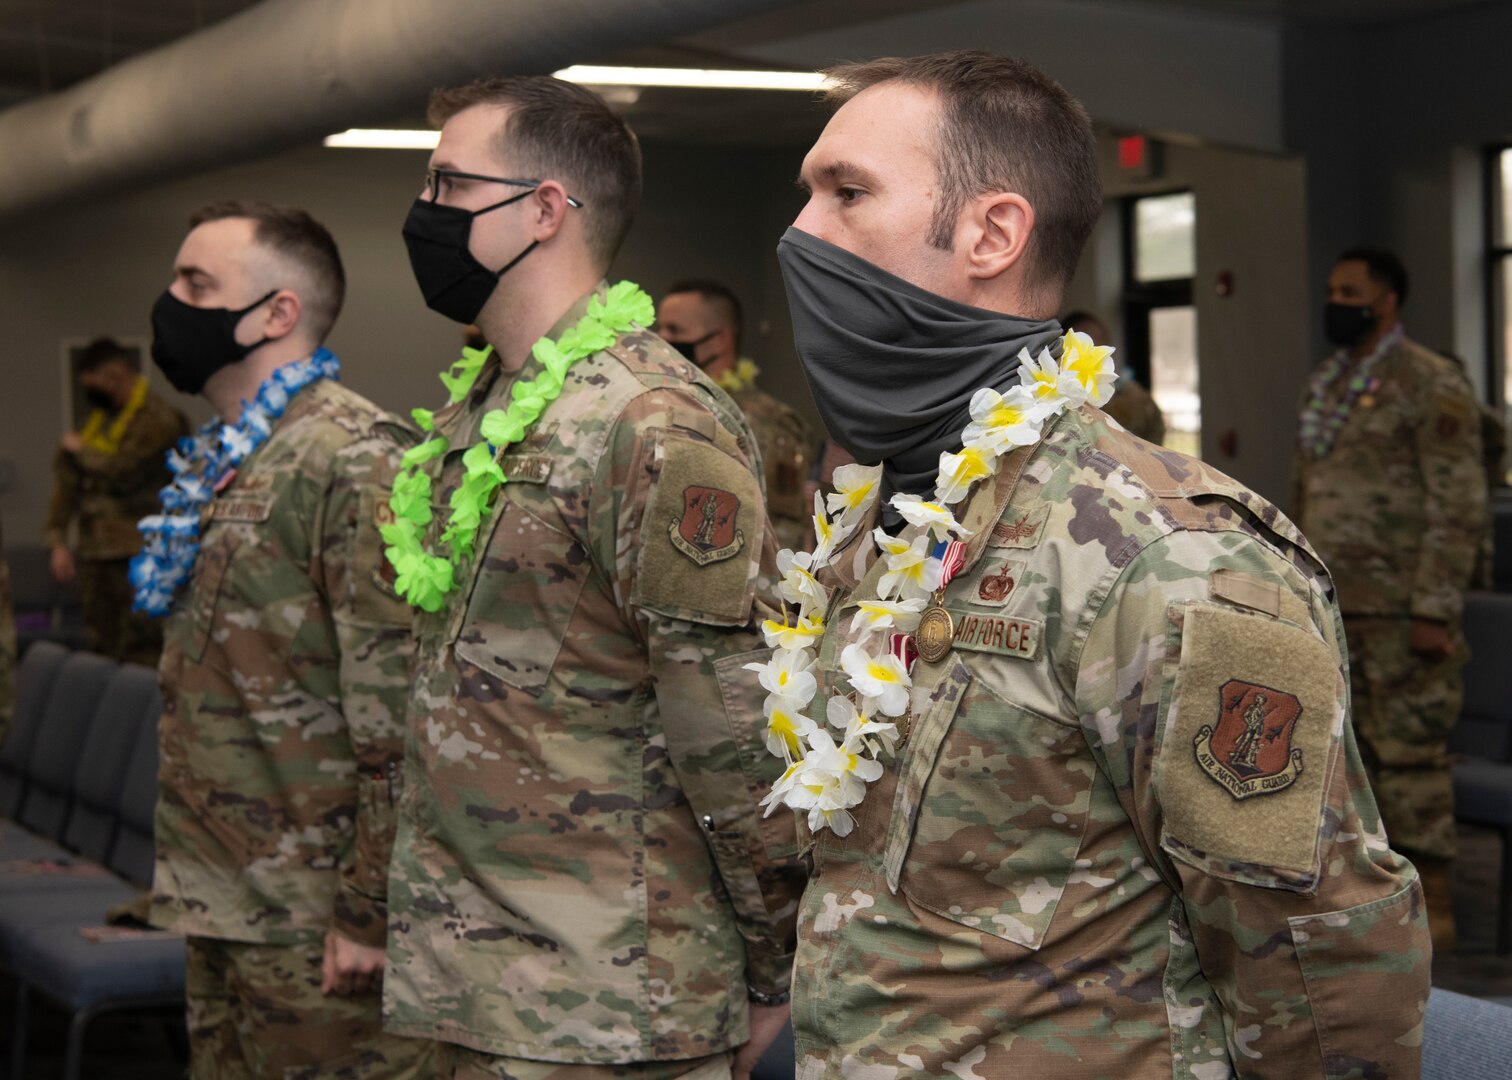 Three members of the 856th Cyber Protection Team stand with leis around their necks at an end of mobilization ceremony Feb. 25, 2022, in Hampton, Virginia.